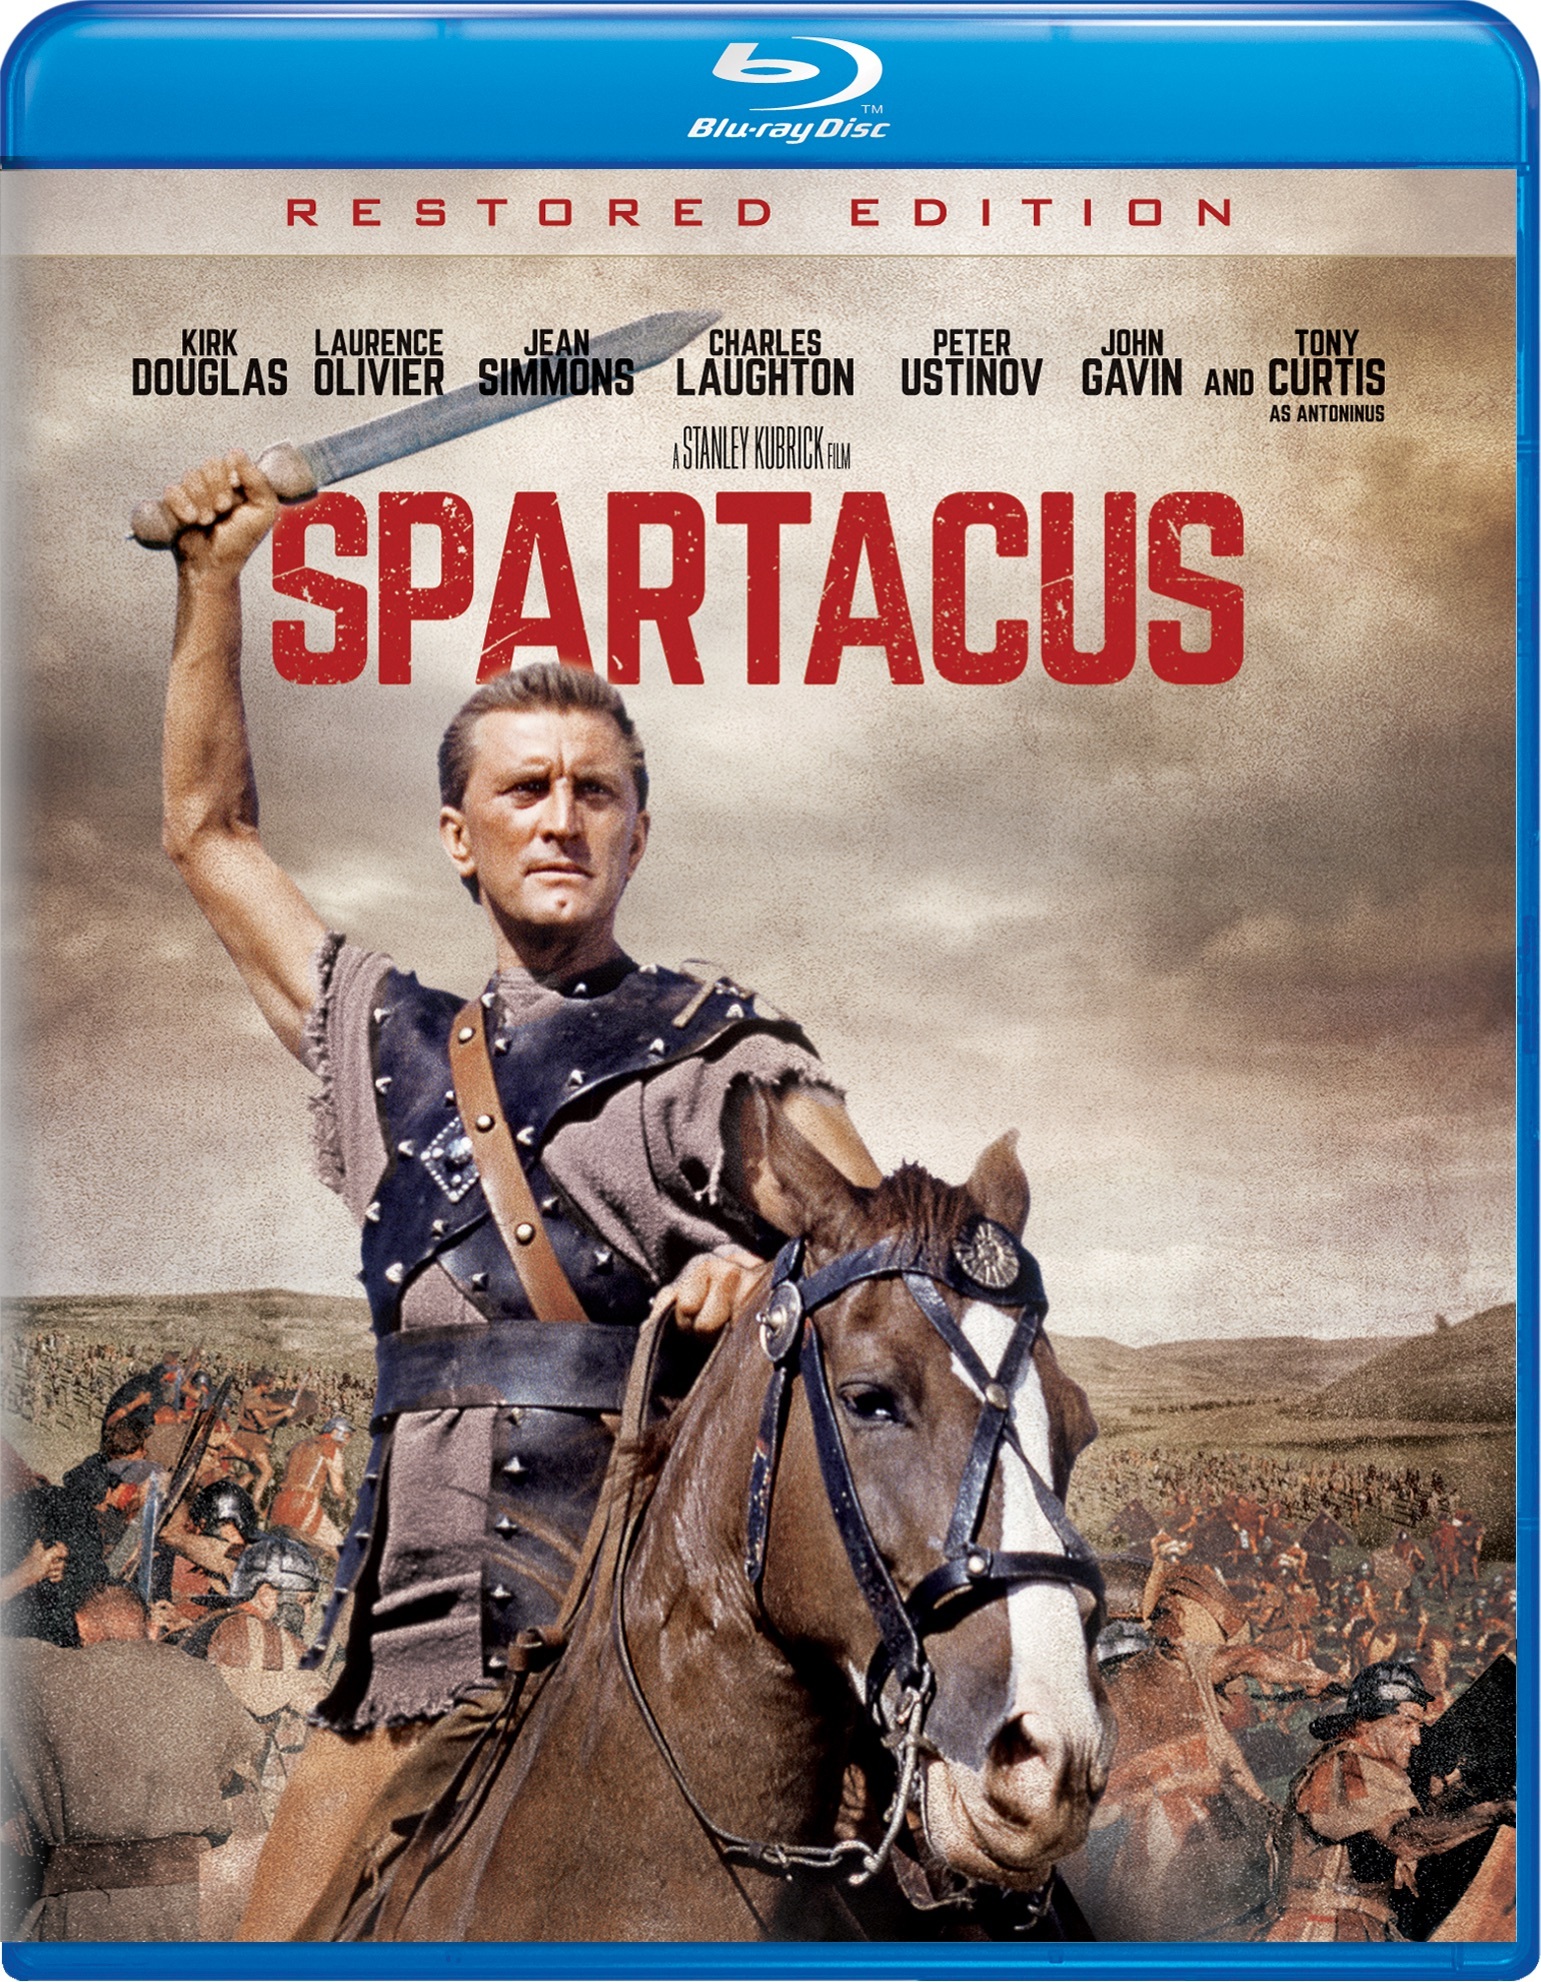 Spartacus (Restored) - Blu-ray [ 1960 ]  - Modern Classic Movies On Blu-ray - Movies On GRUV